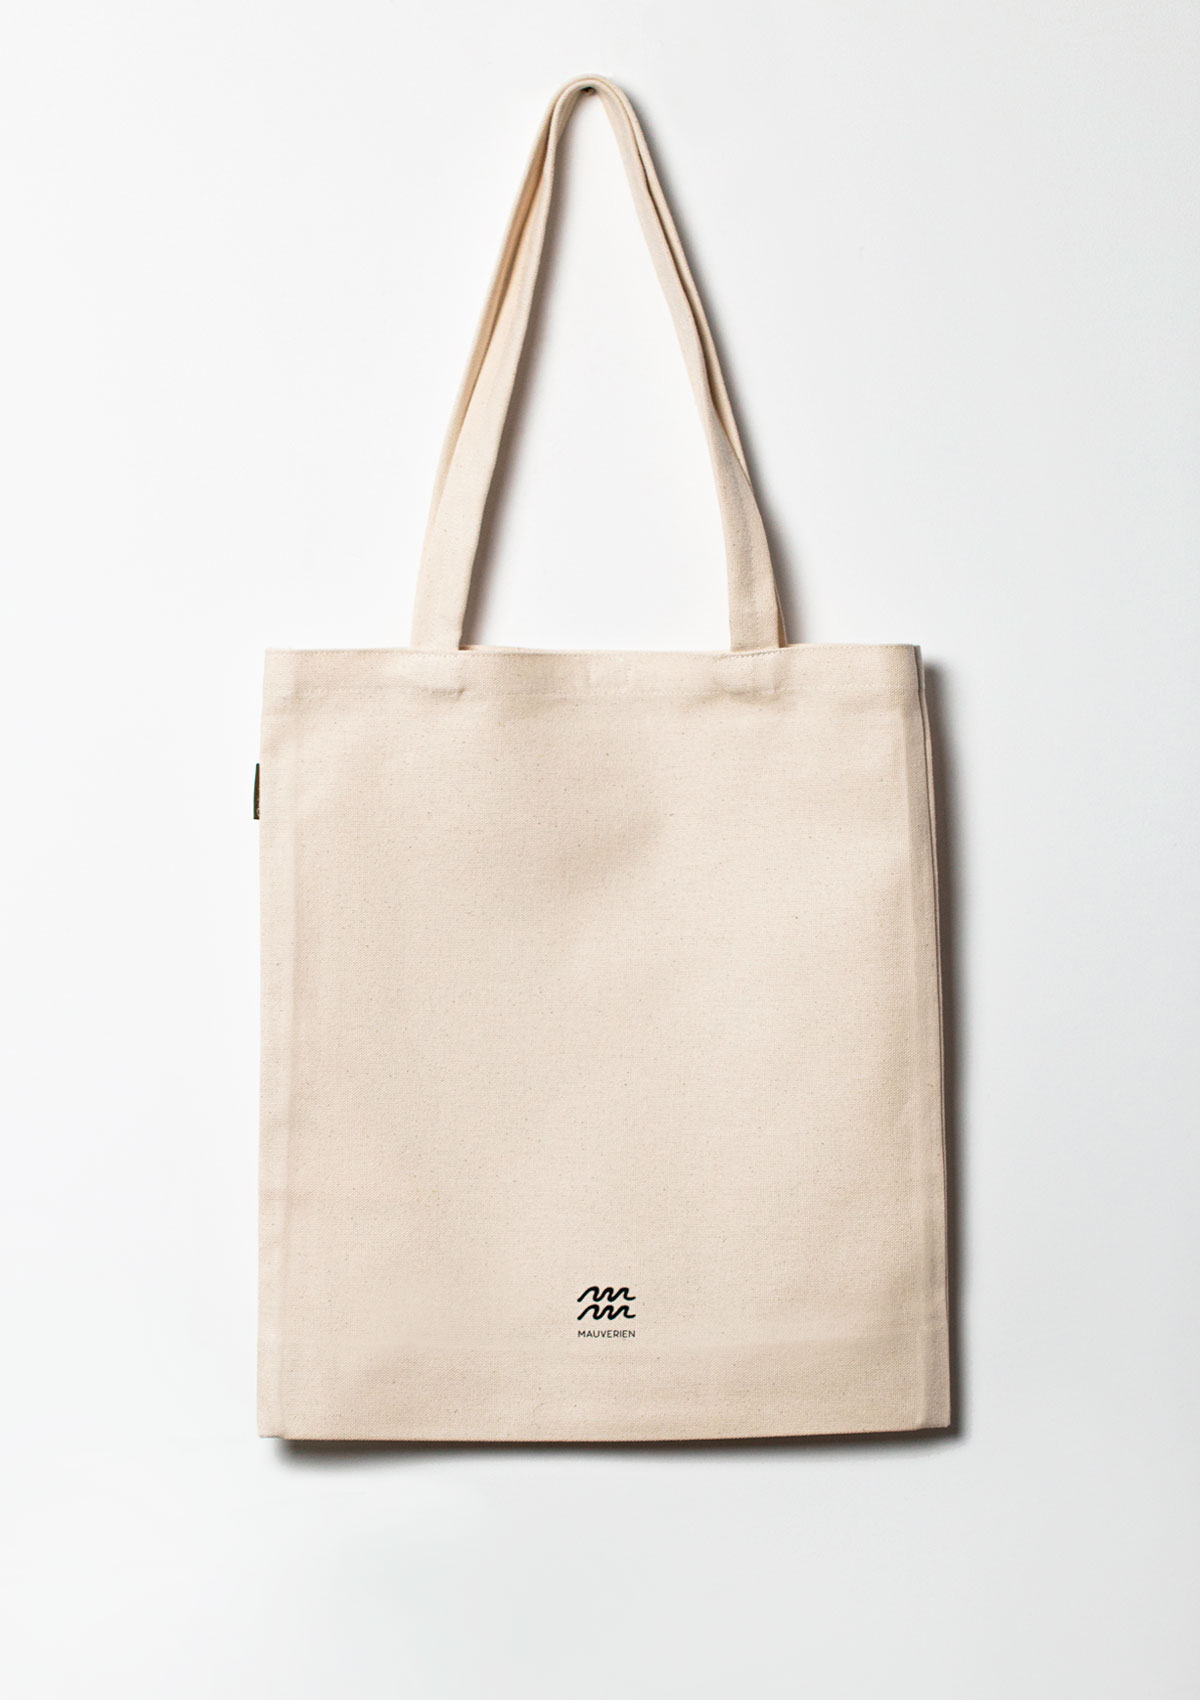 The back of the Eyes cotton tote bag with black logo Mauverien printed at the bottom in the center.